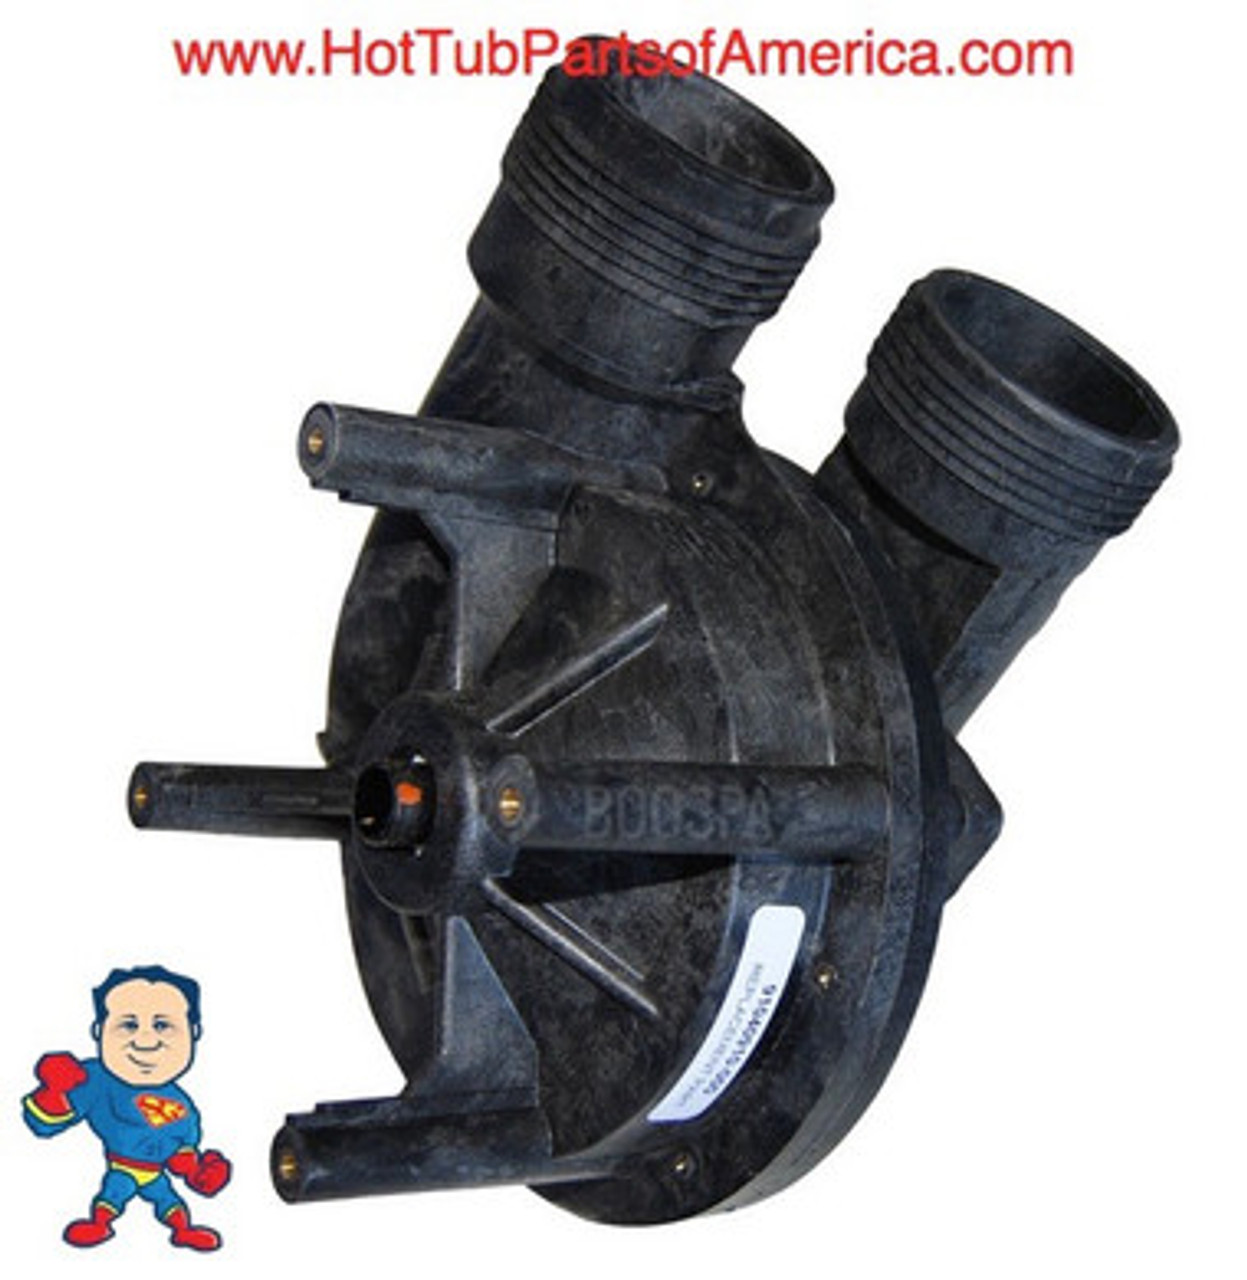 Wet End, Aqua-Flo, FMVP, 1.0HP, 1-1/2", 48 frame, 10-11A/115v Verticle Mount Pump
This is a 48 Frame Wet End and the Thru-Bolts are about 5 1/4" apart in a cross pattern and 3 5/8" Side to Side....Also the bolt heads on the thru-bolts are 1/4" on a 48 frame motor..IF your bolt heads are 5/16" you have a 56fr motor and this wet end will not work..